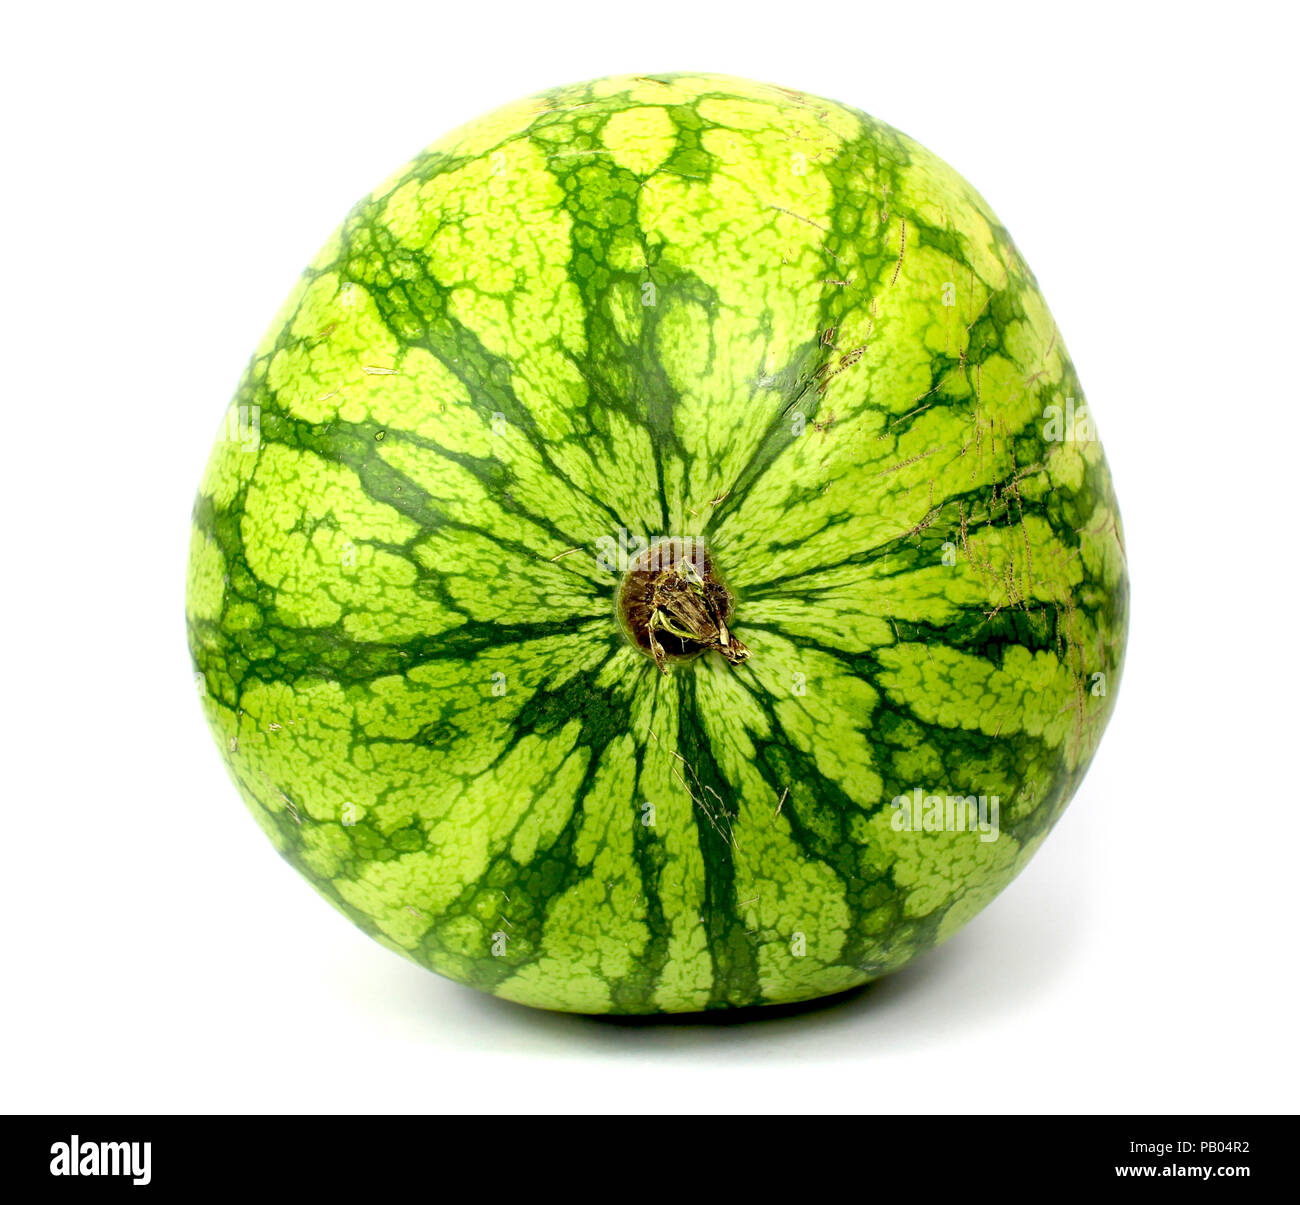 Single watermelon uncut isolated and close up on white background Stock Photo